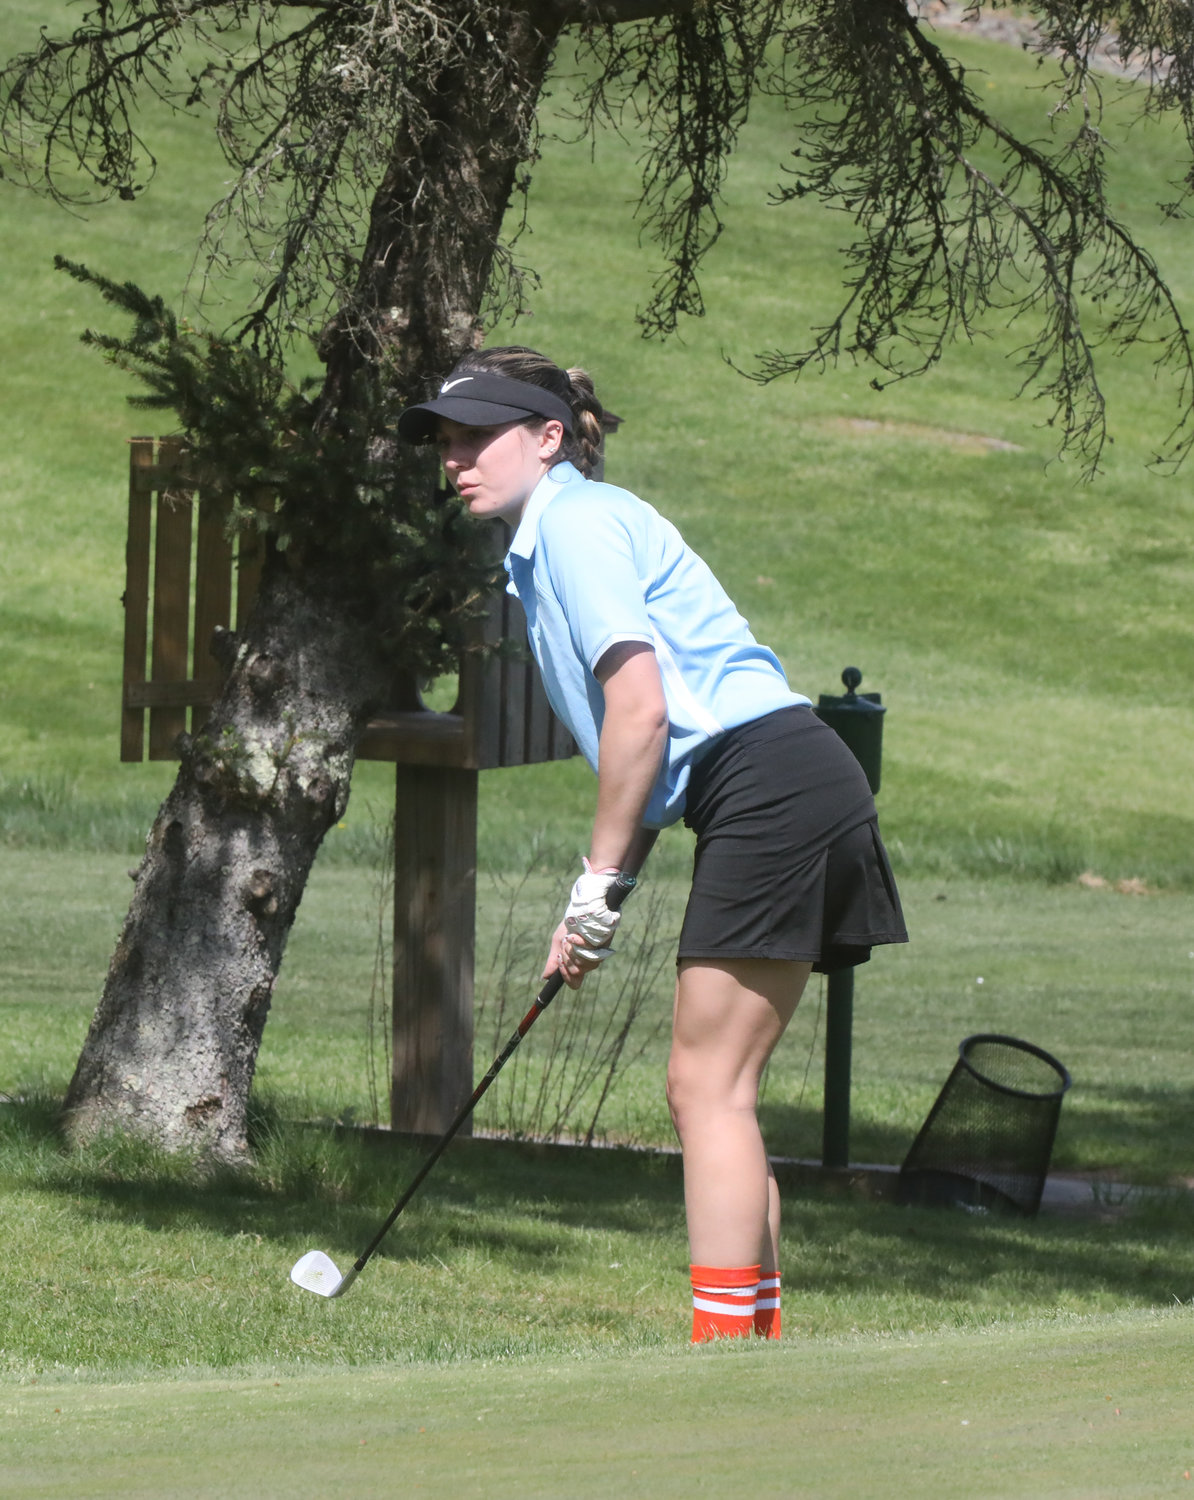 Gabby Cohen finished the two-day Section IX tournament in fourth place, with rounds of 89 and 91 for a total of 180. Her placement qualified her for the state tournament that will take place June 4-6 in Saratoga Springs.